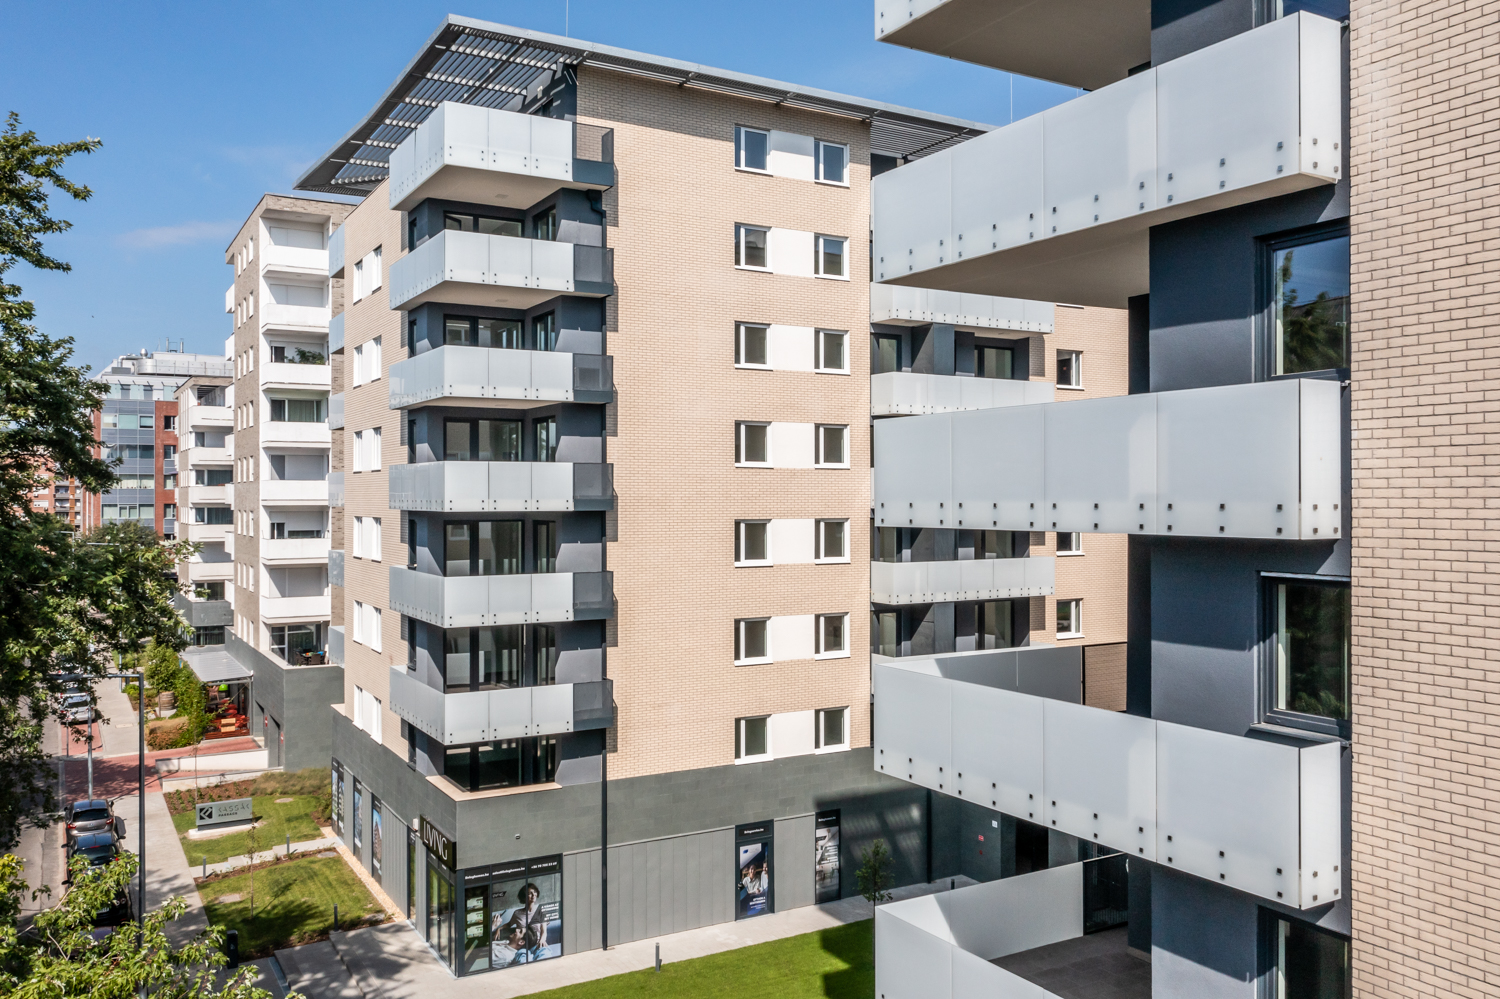 Kassák Passage, the second phase of LIVING’s Kassák Project, has been handed over